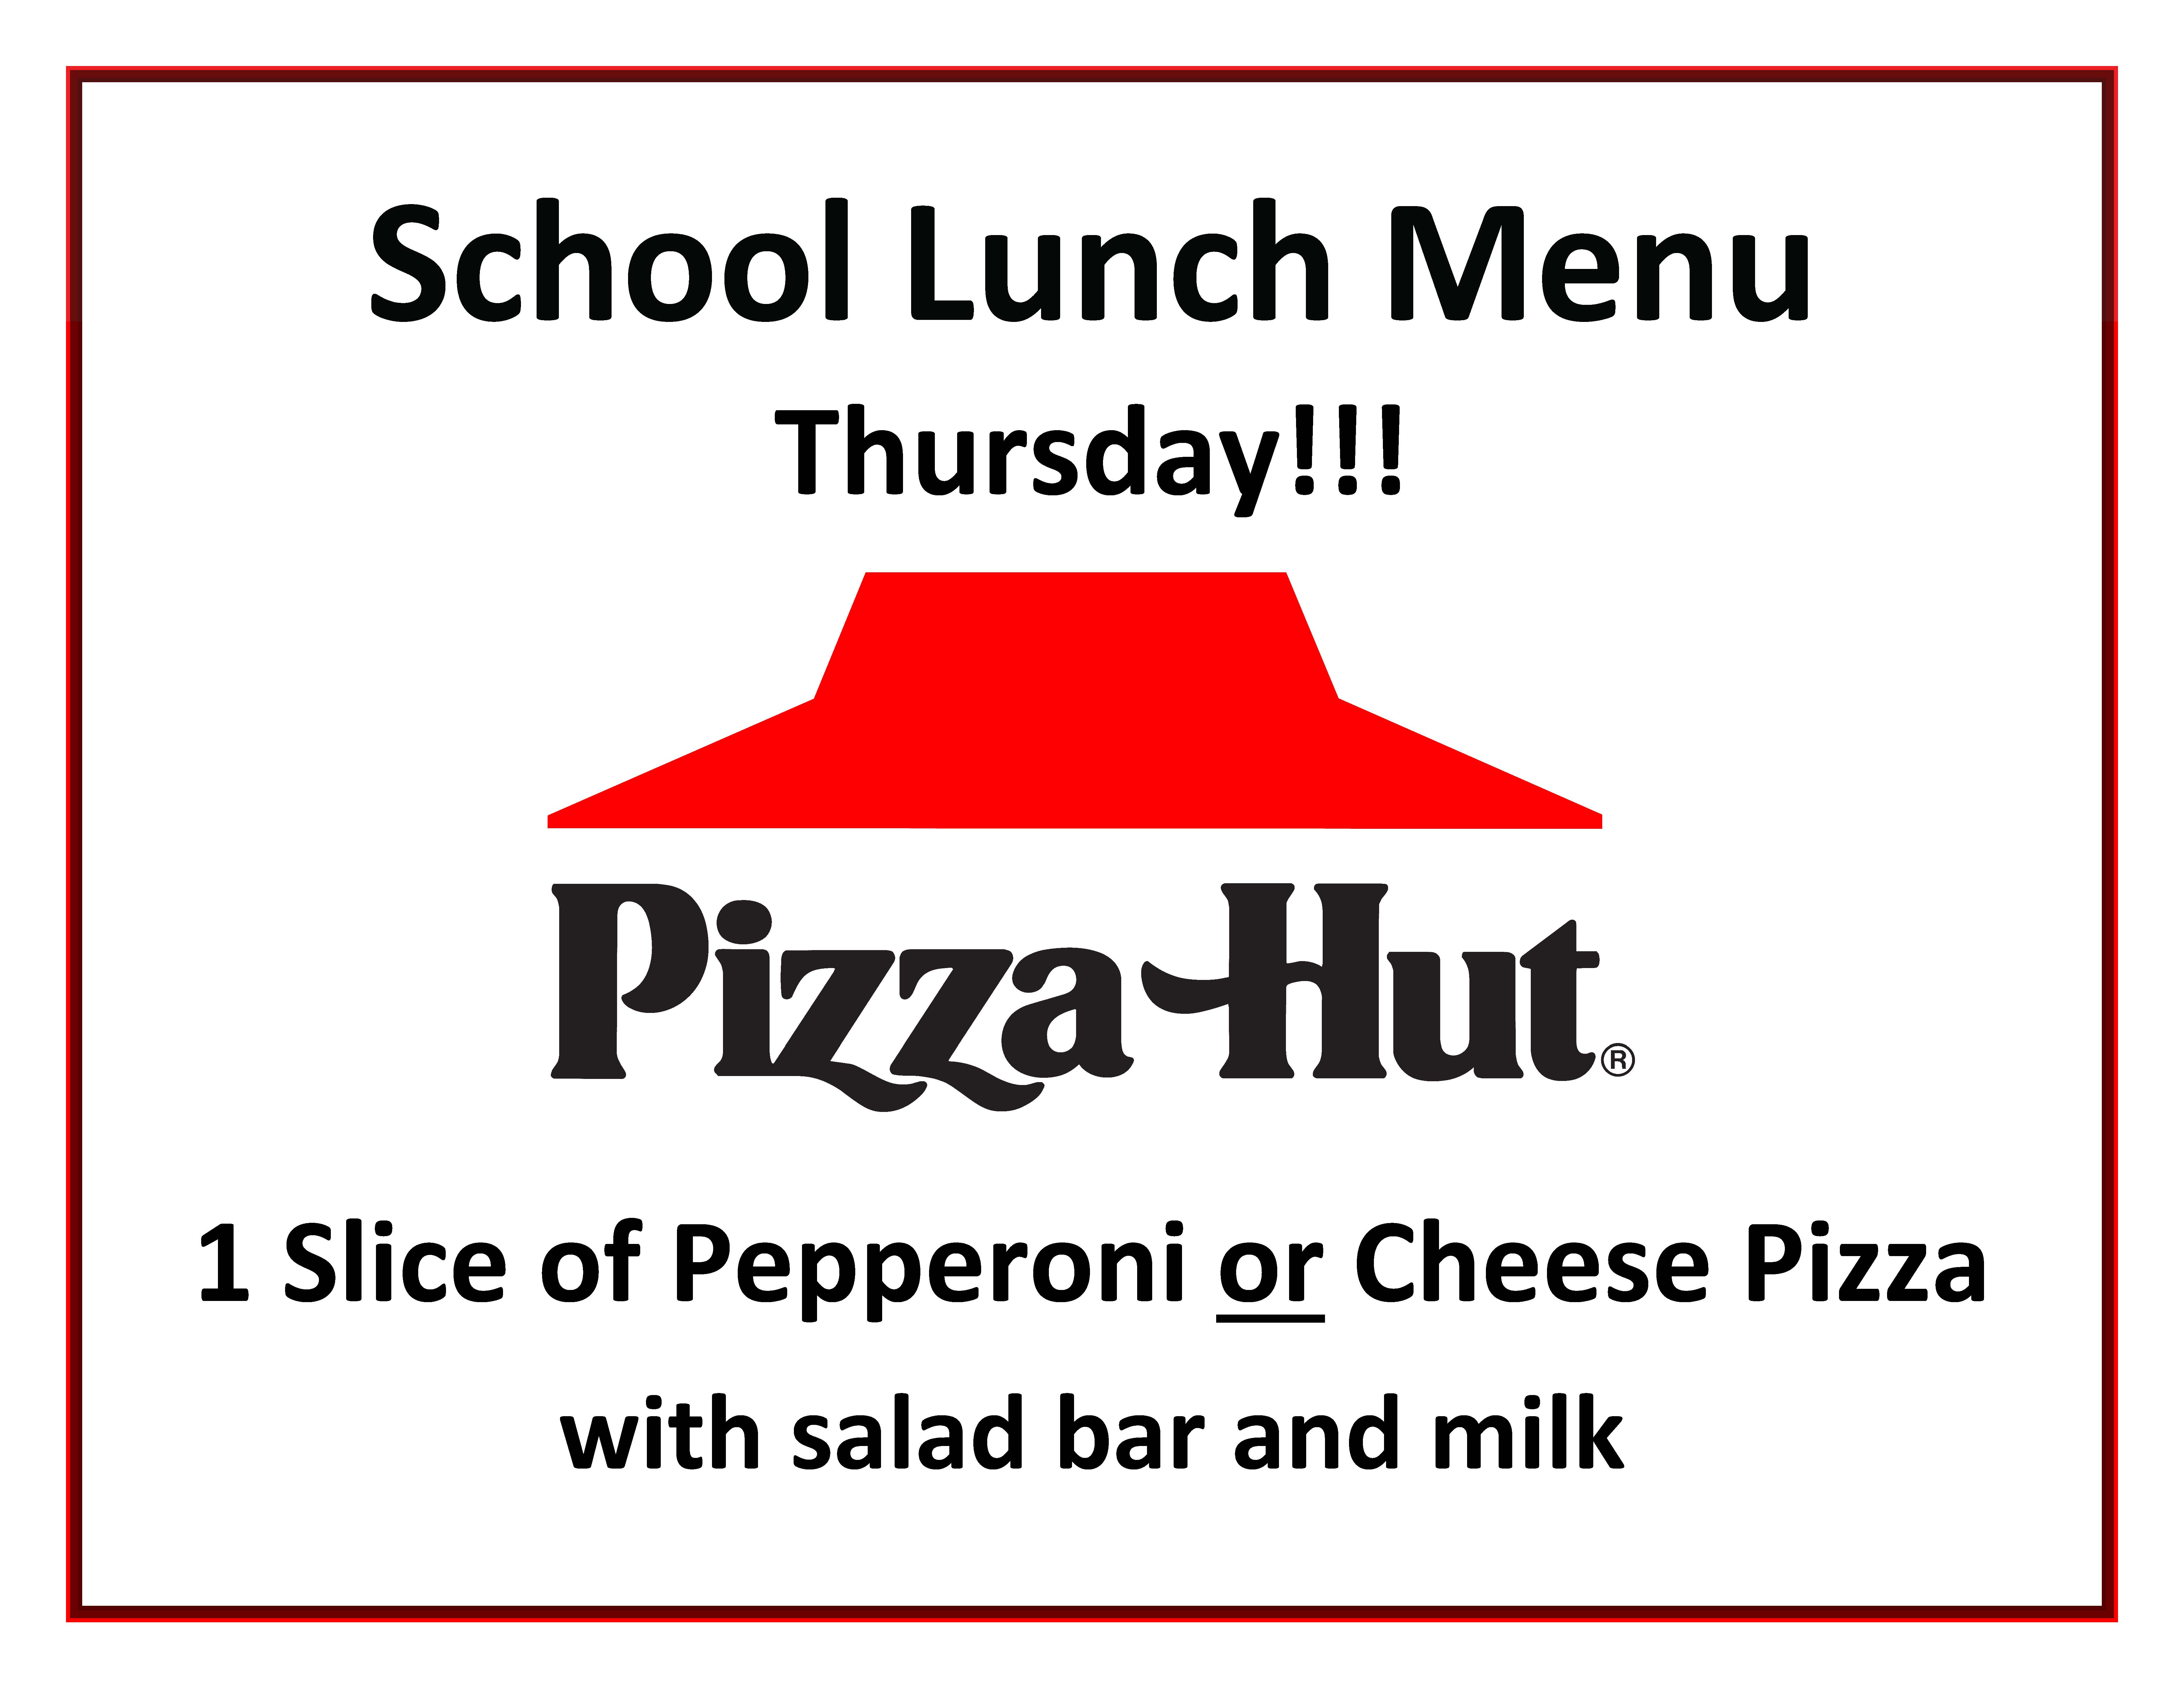 Pizza Hut Day in the school cafeteria- September 28